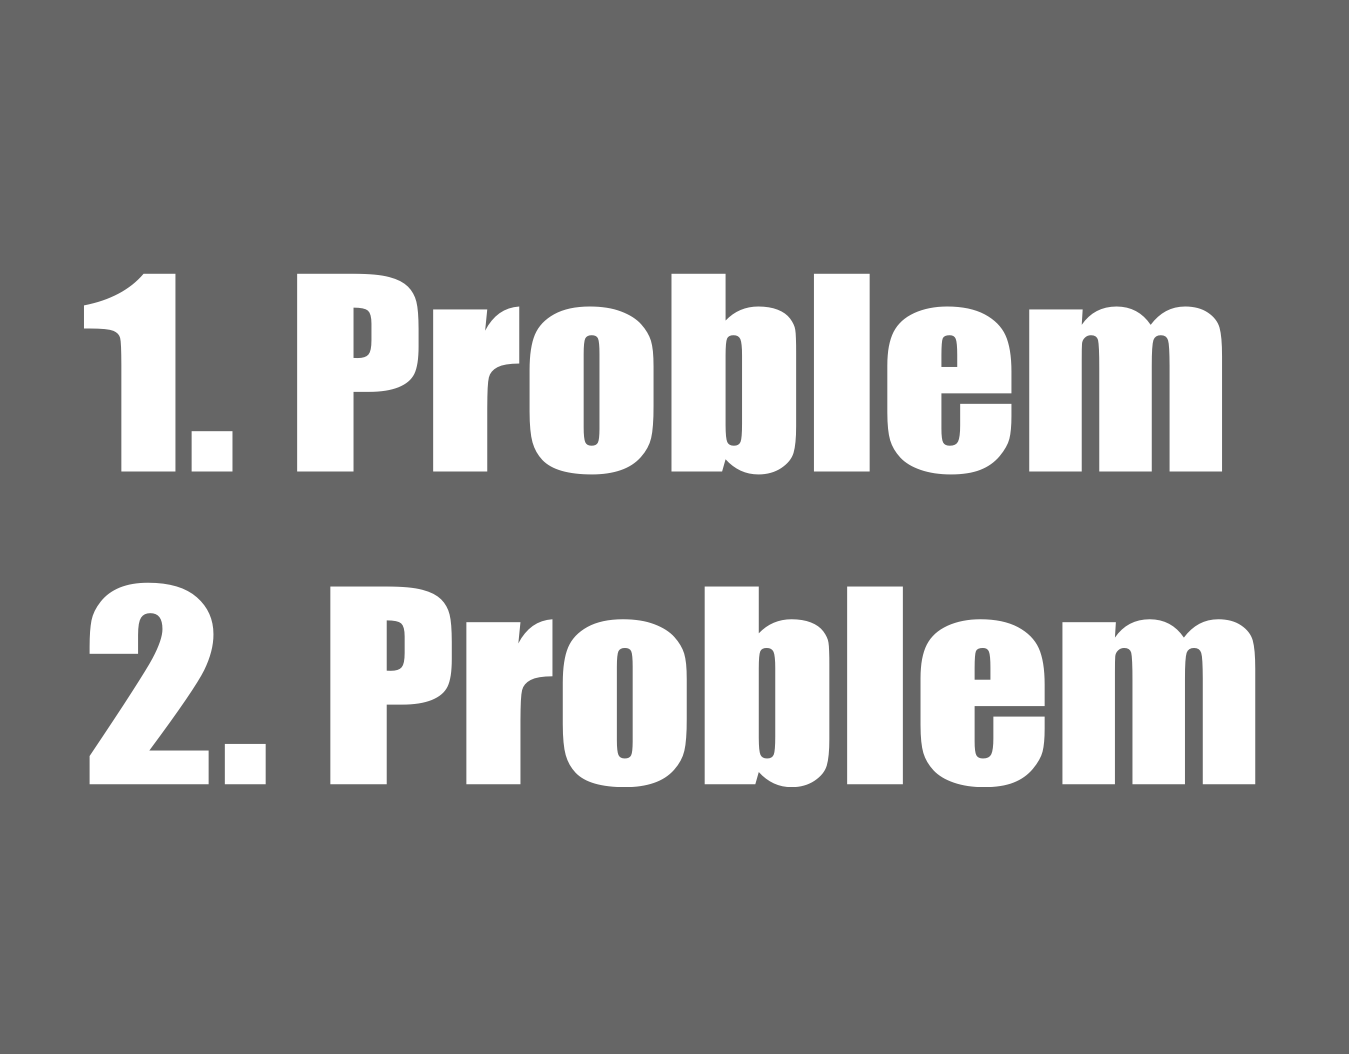 two problems